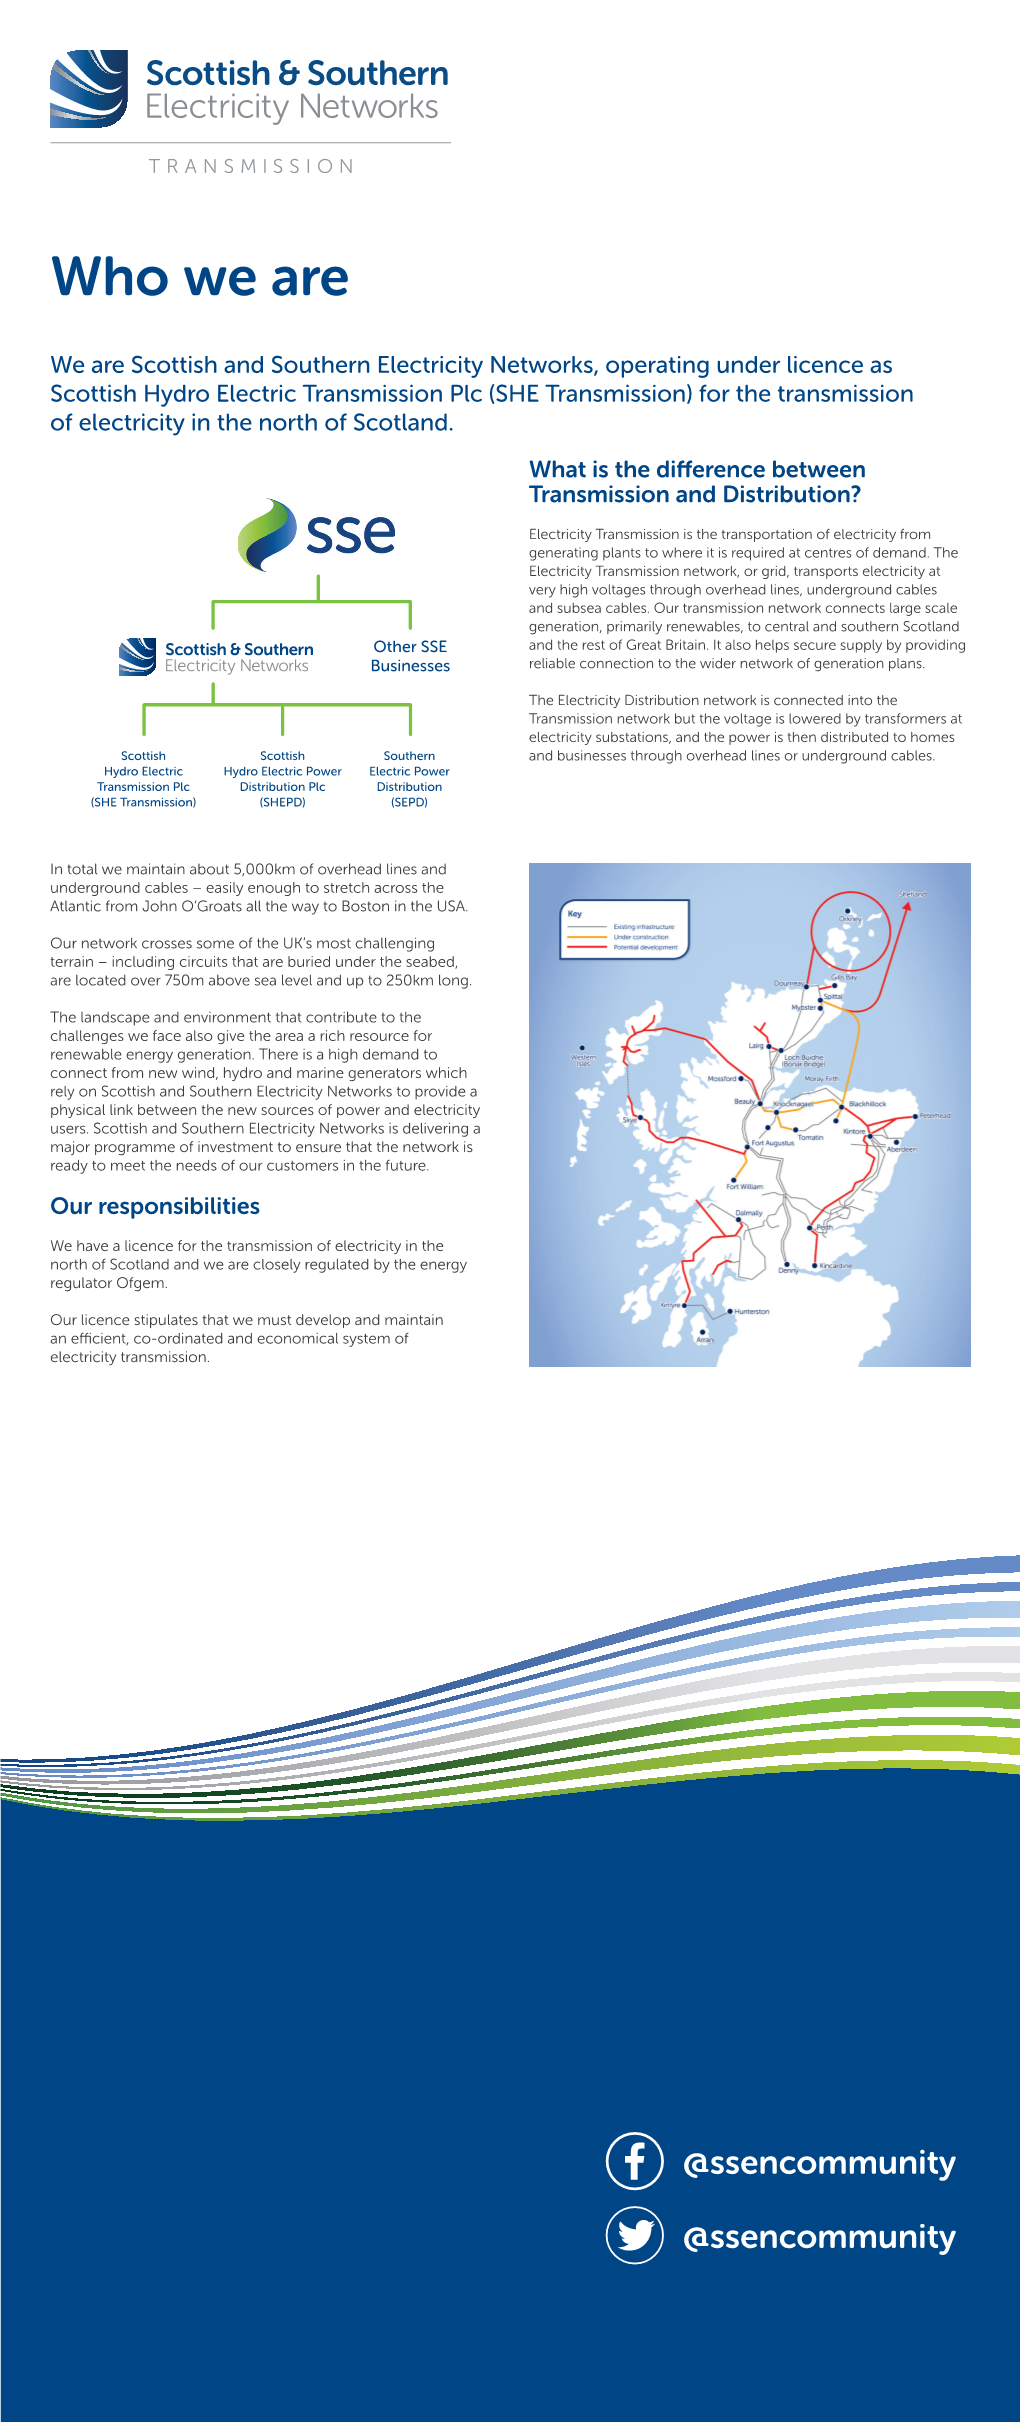 We Are Scottish and Southern Electricity Networks, Operating